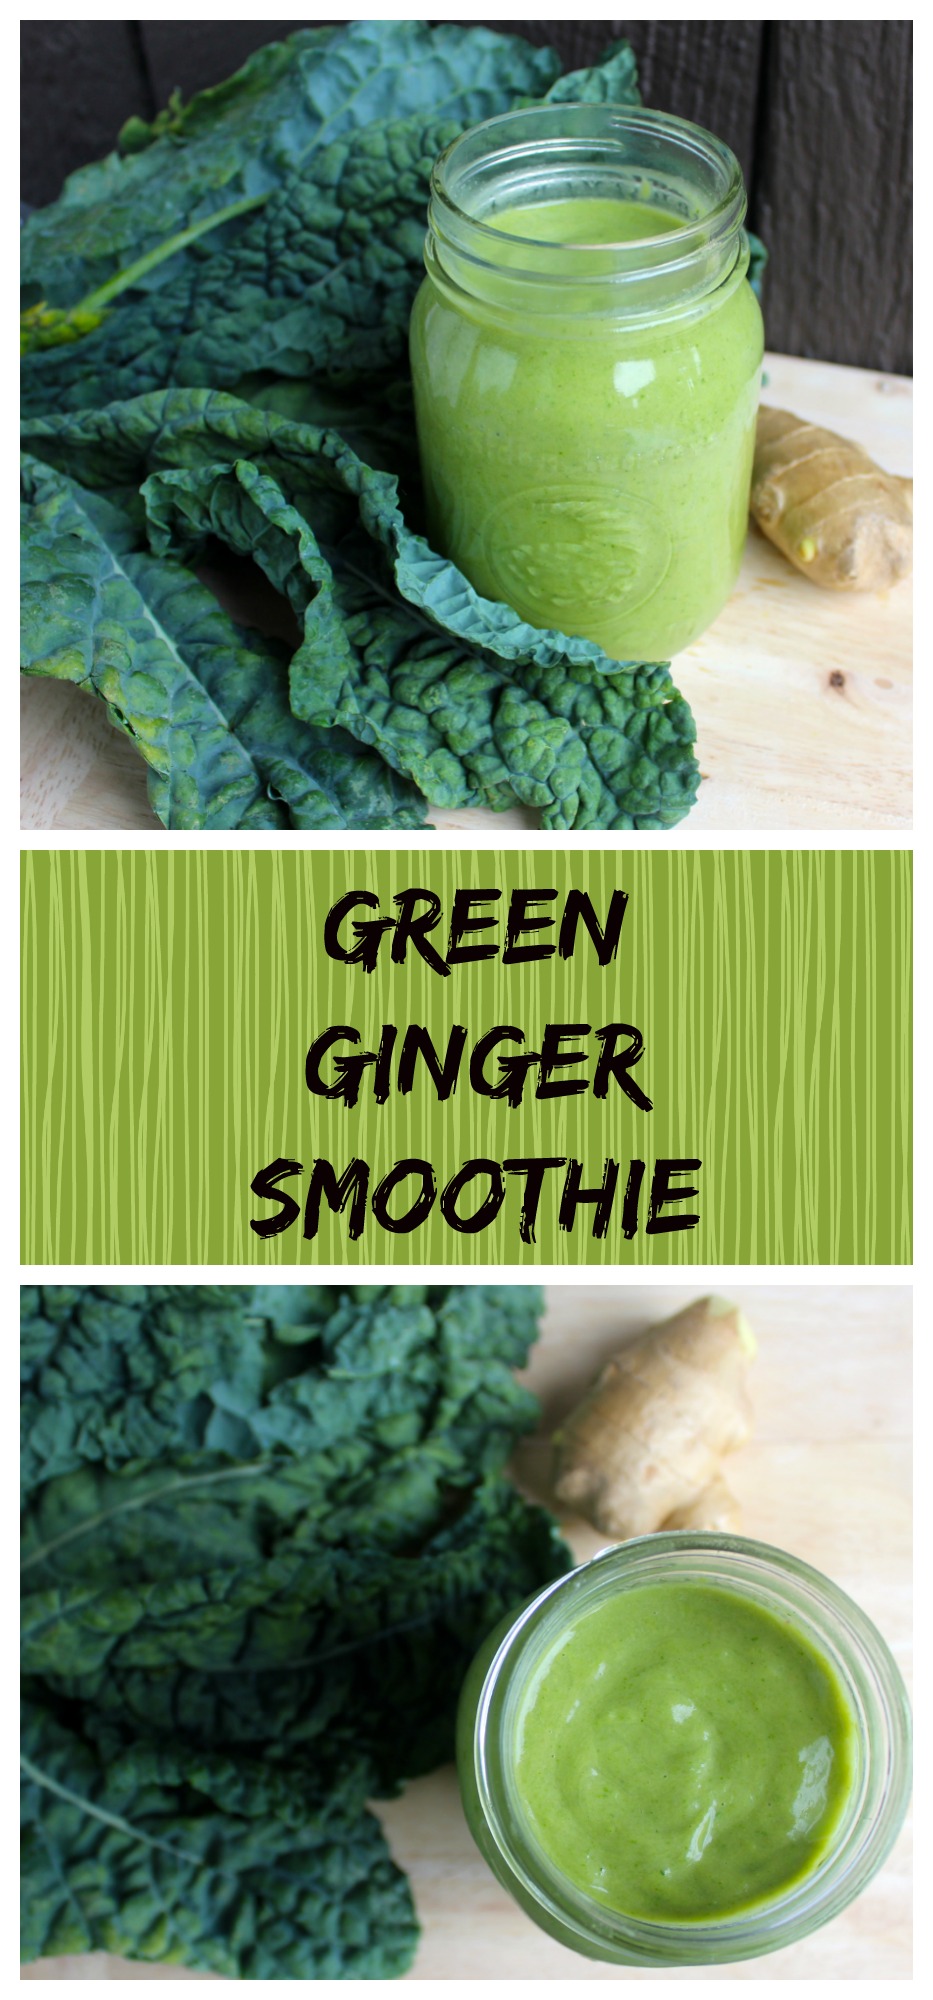 Green Ginger Smoothie with Kale and Flax Seeds (vegan, Low-glycemic)